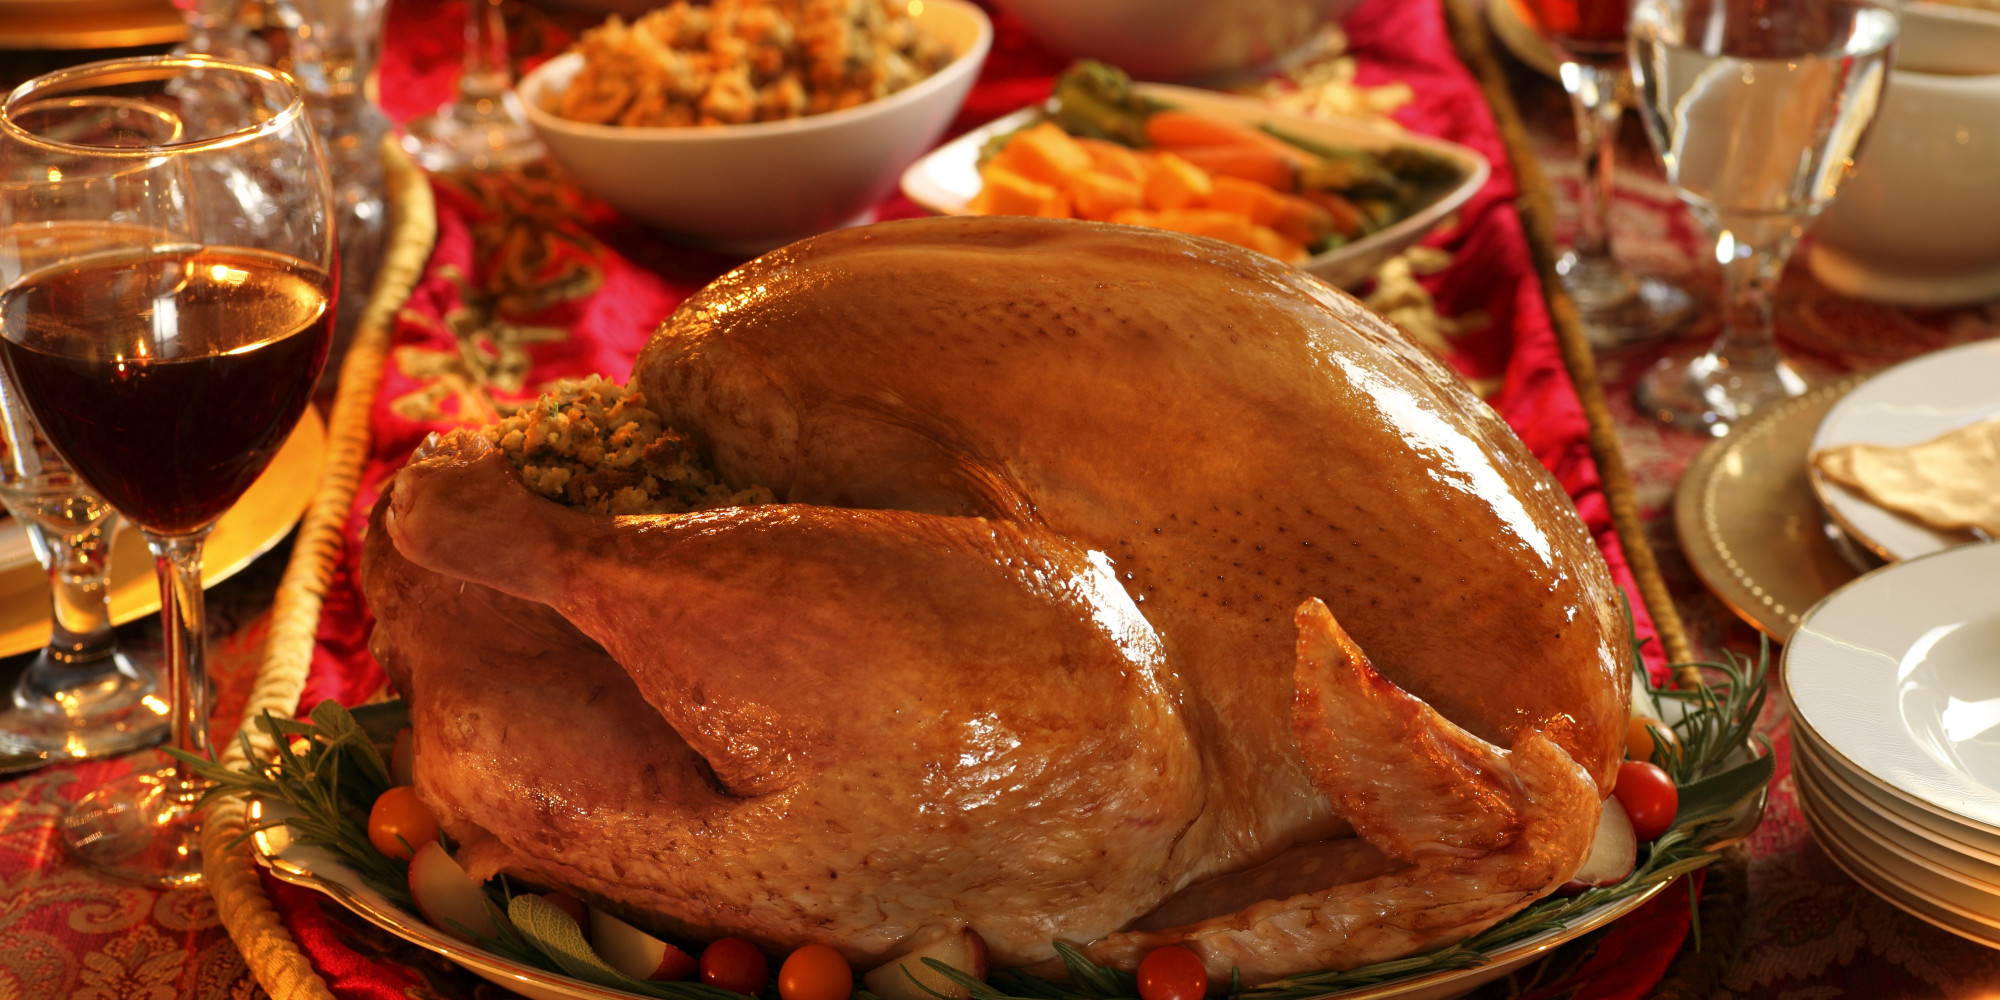 The Top 20 Ideas About Craigs Thanksgiving Dinner In A Can Best Recipes Ever